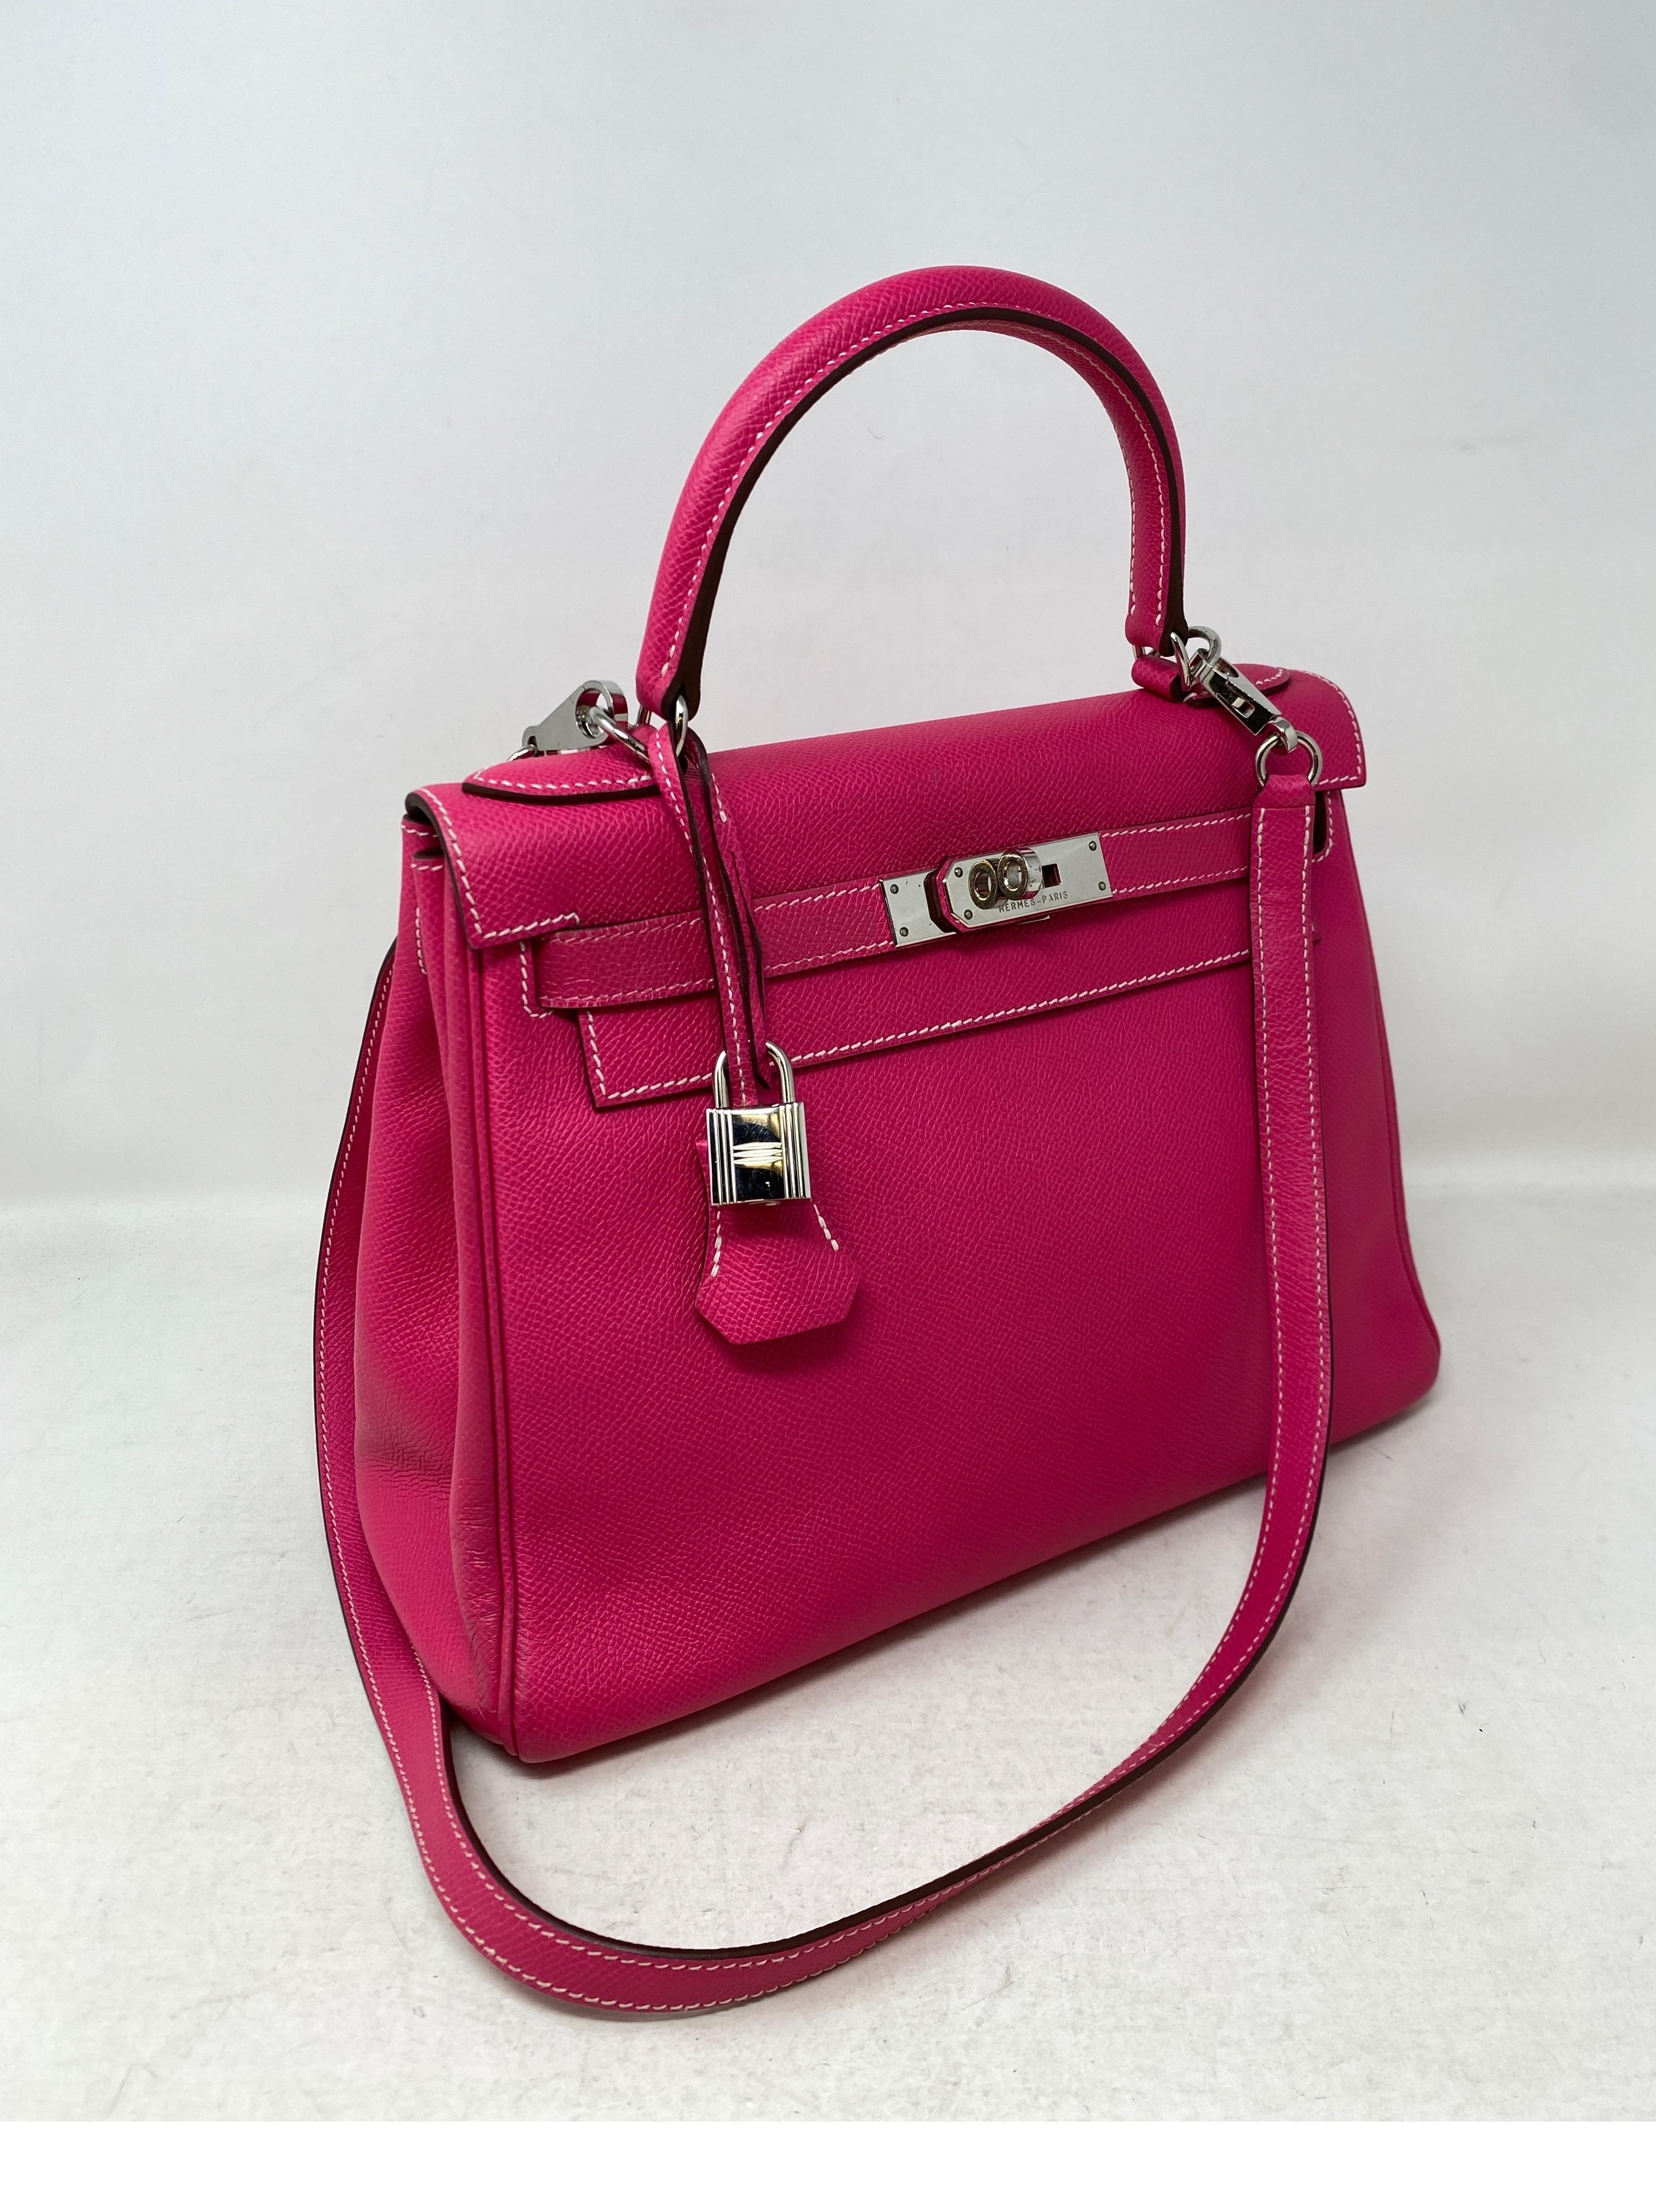 Hermes Rose Tyrien Kelly 28 Bag. Hot pink color. Epsom leather. Rare and most wanted Kelly size. Palladium hardware. Includes clochette, lock, keys, and dust bag. Includes leather cleaning receipt from Hermes. Guaranteed authentic. 